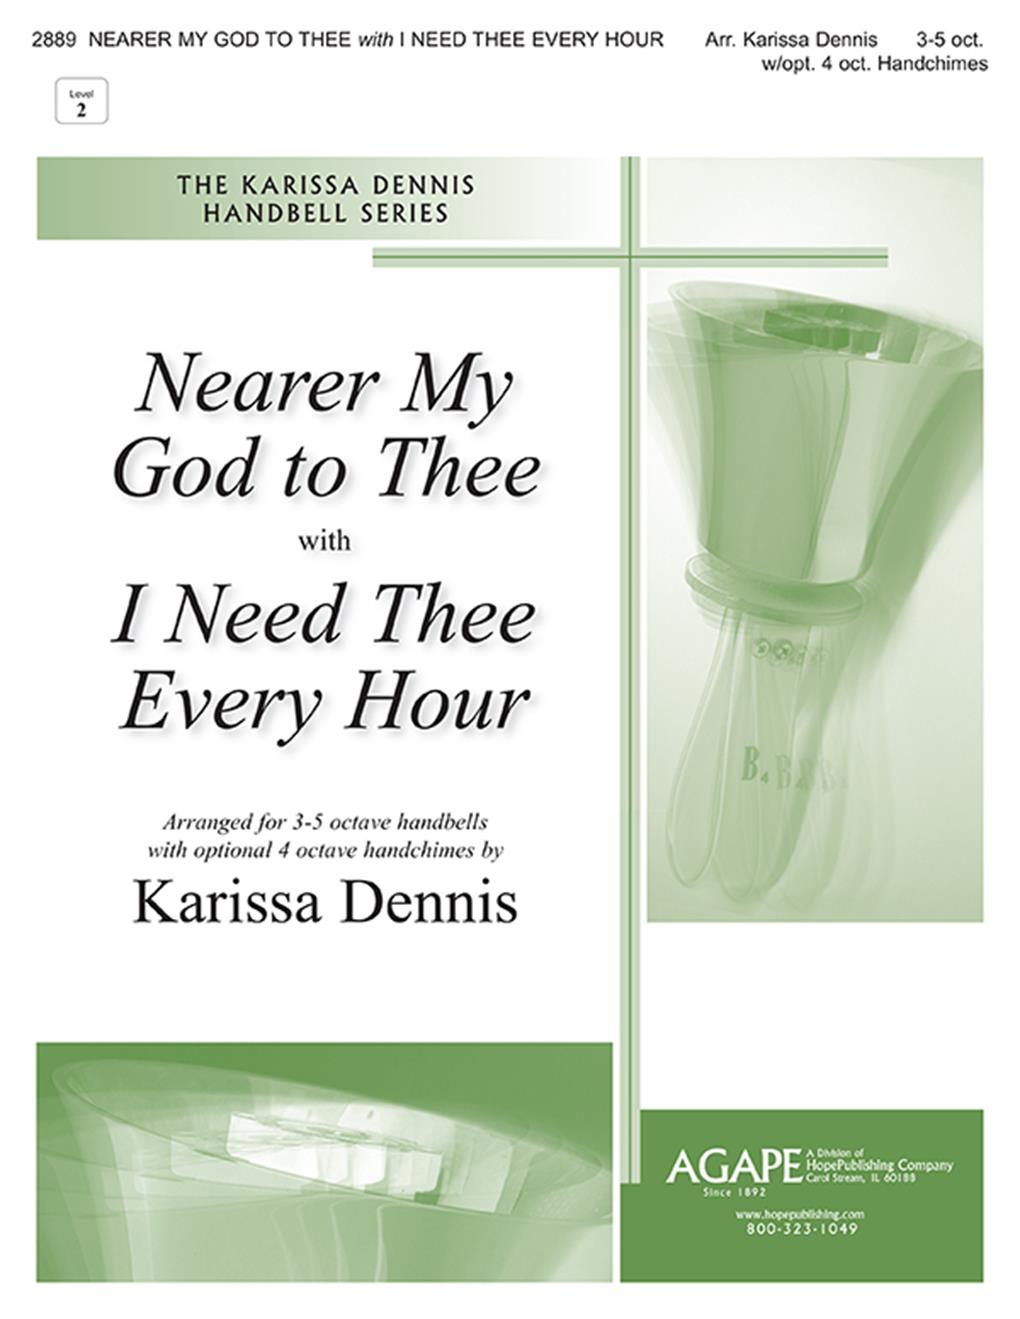 Nearer My God to Thee (I Need Thee Every Hour) - 3-5 Oct. Cover Image